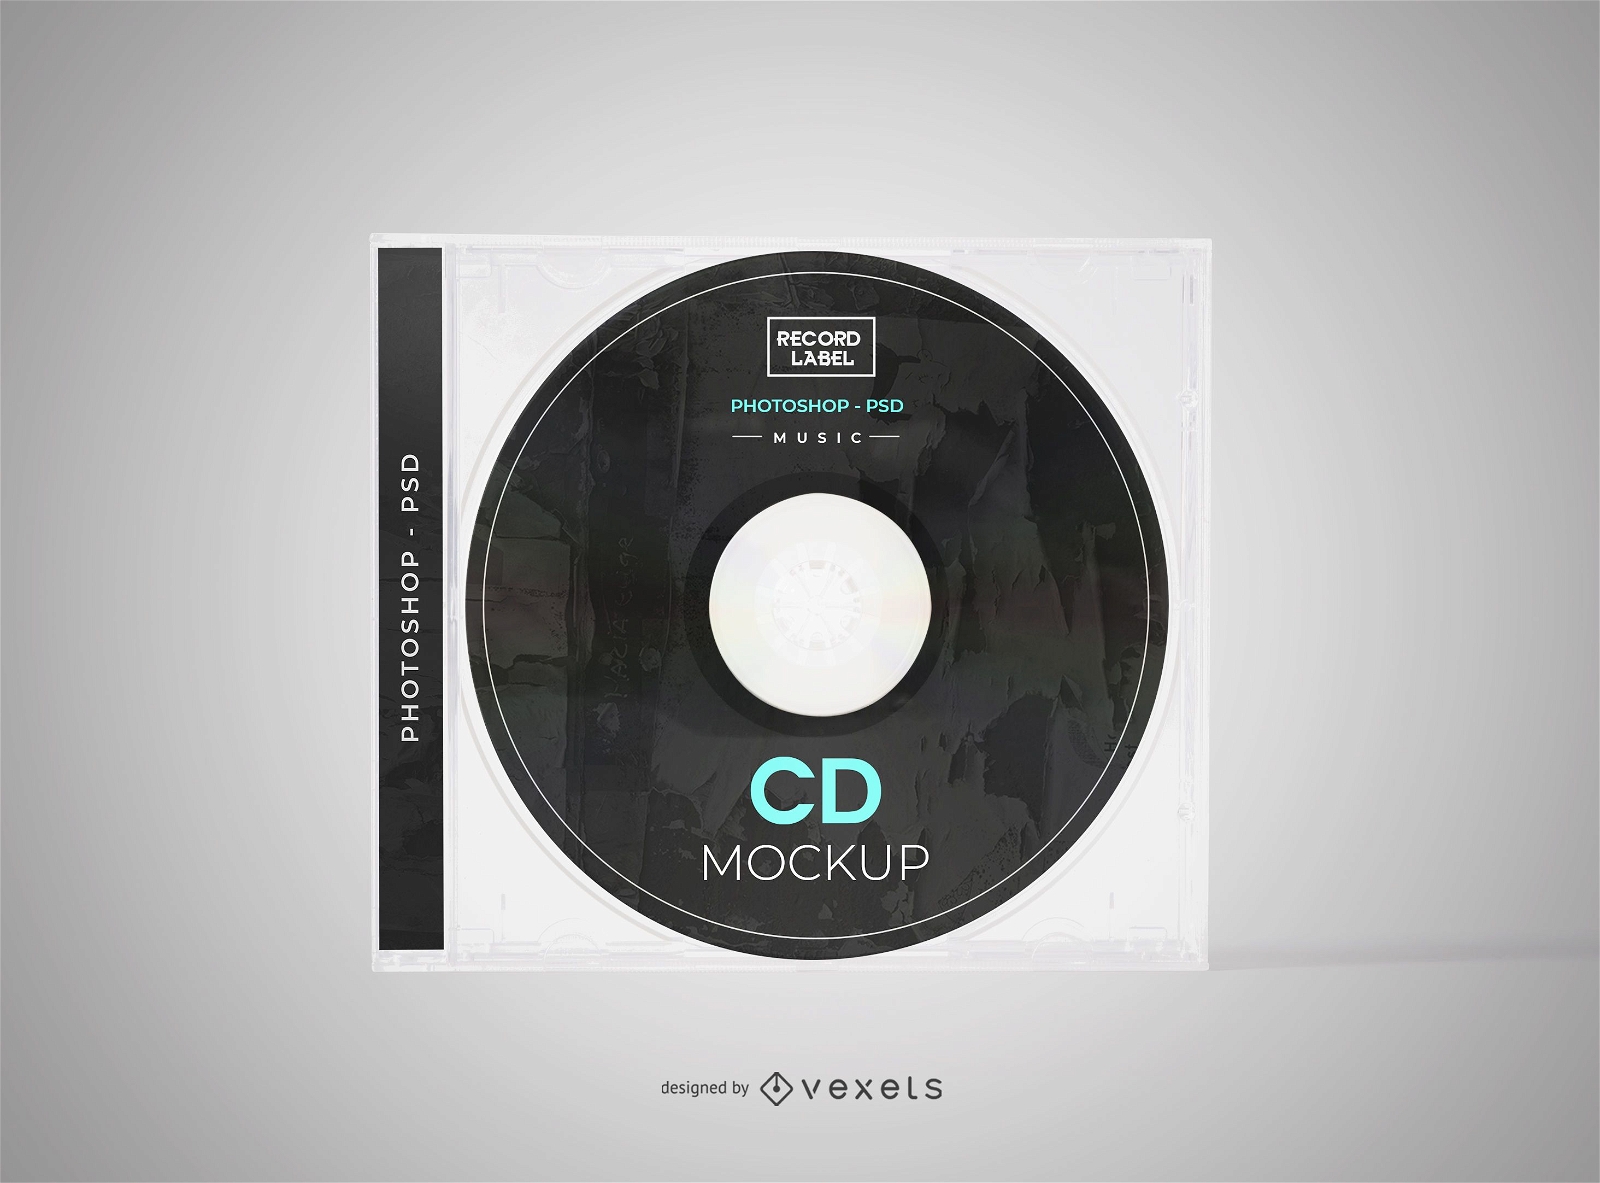 Compact Disc Cover Mockup